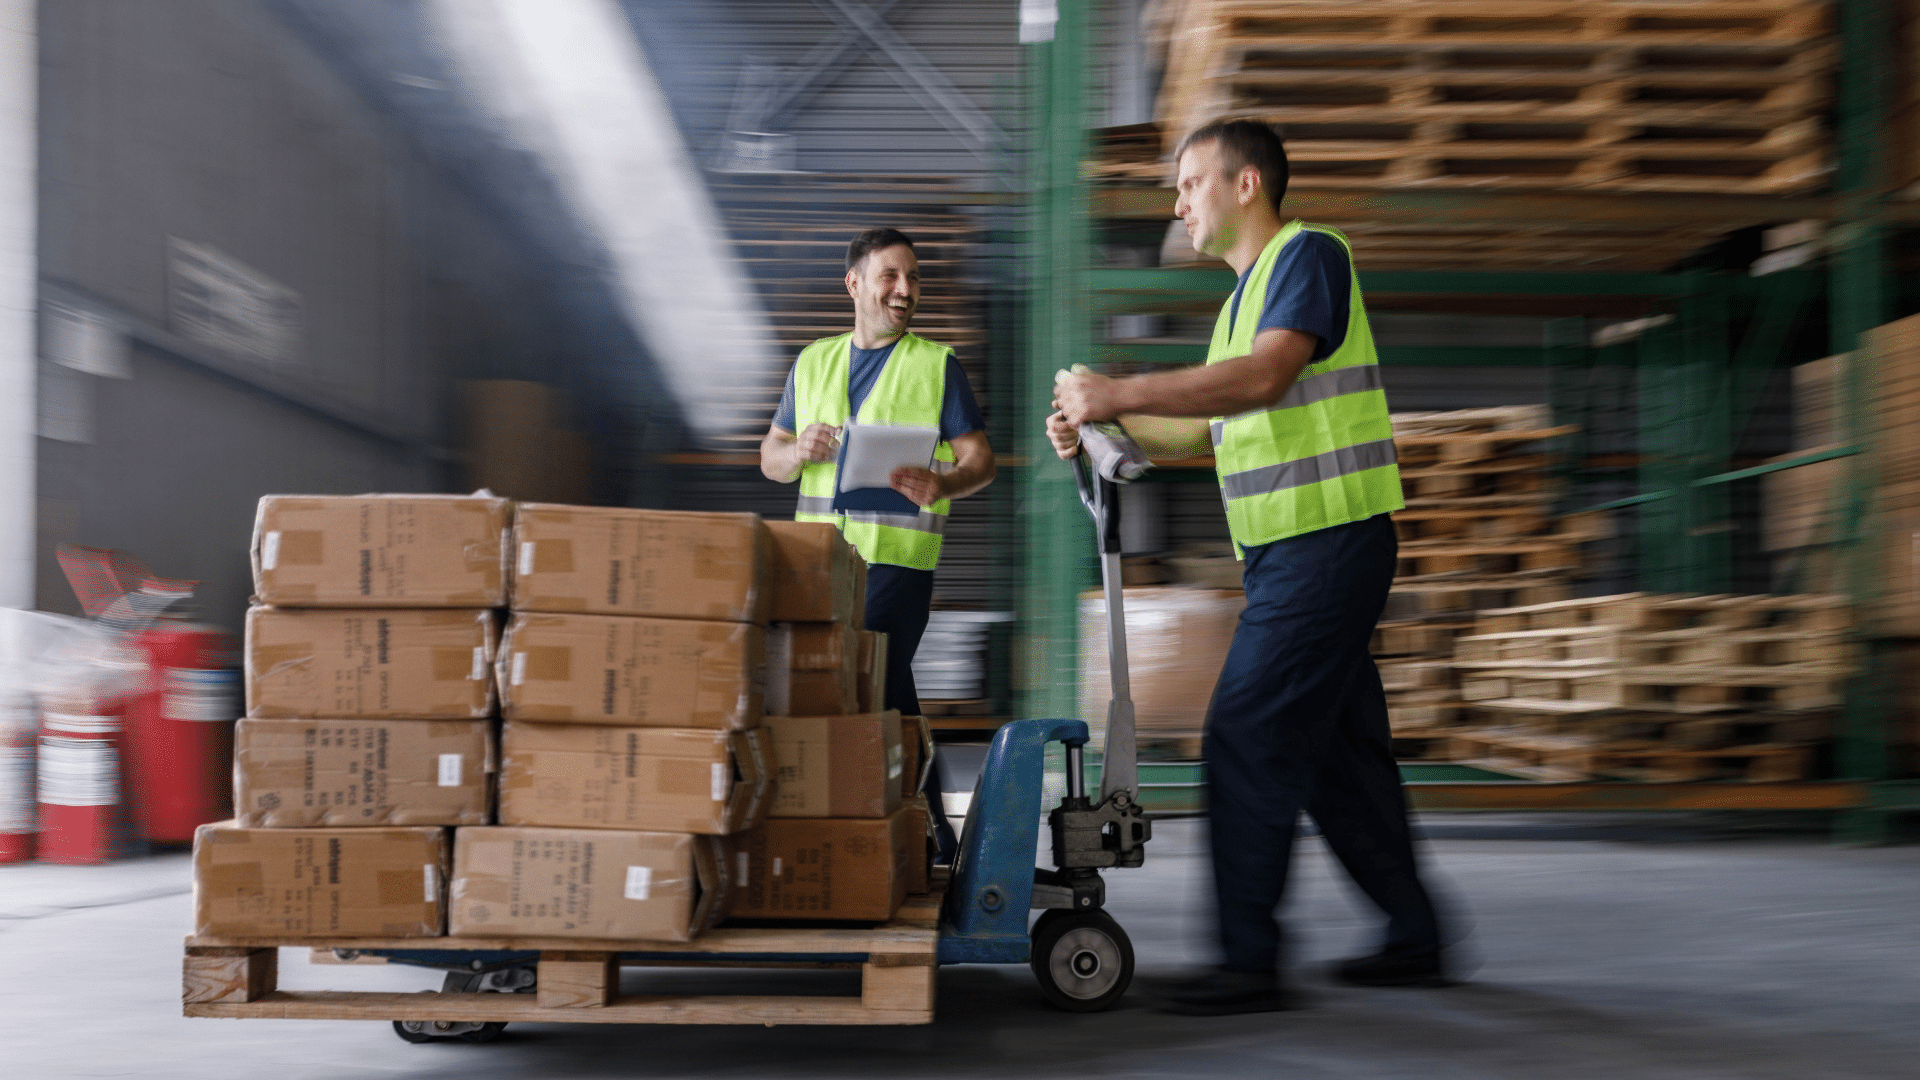 Featured image for “How a 3PL can help your business improve its order fulfillment”